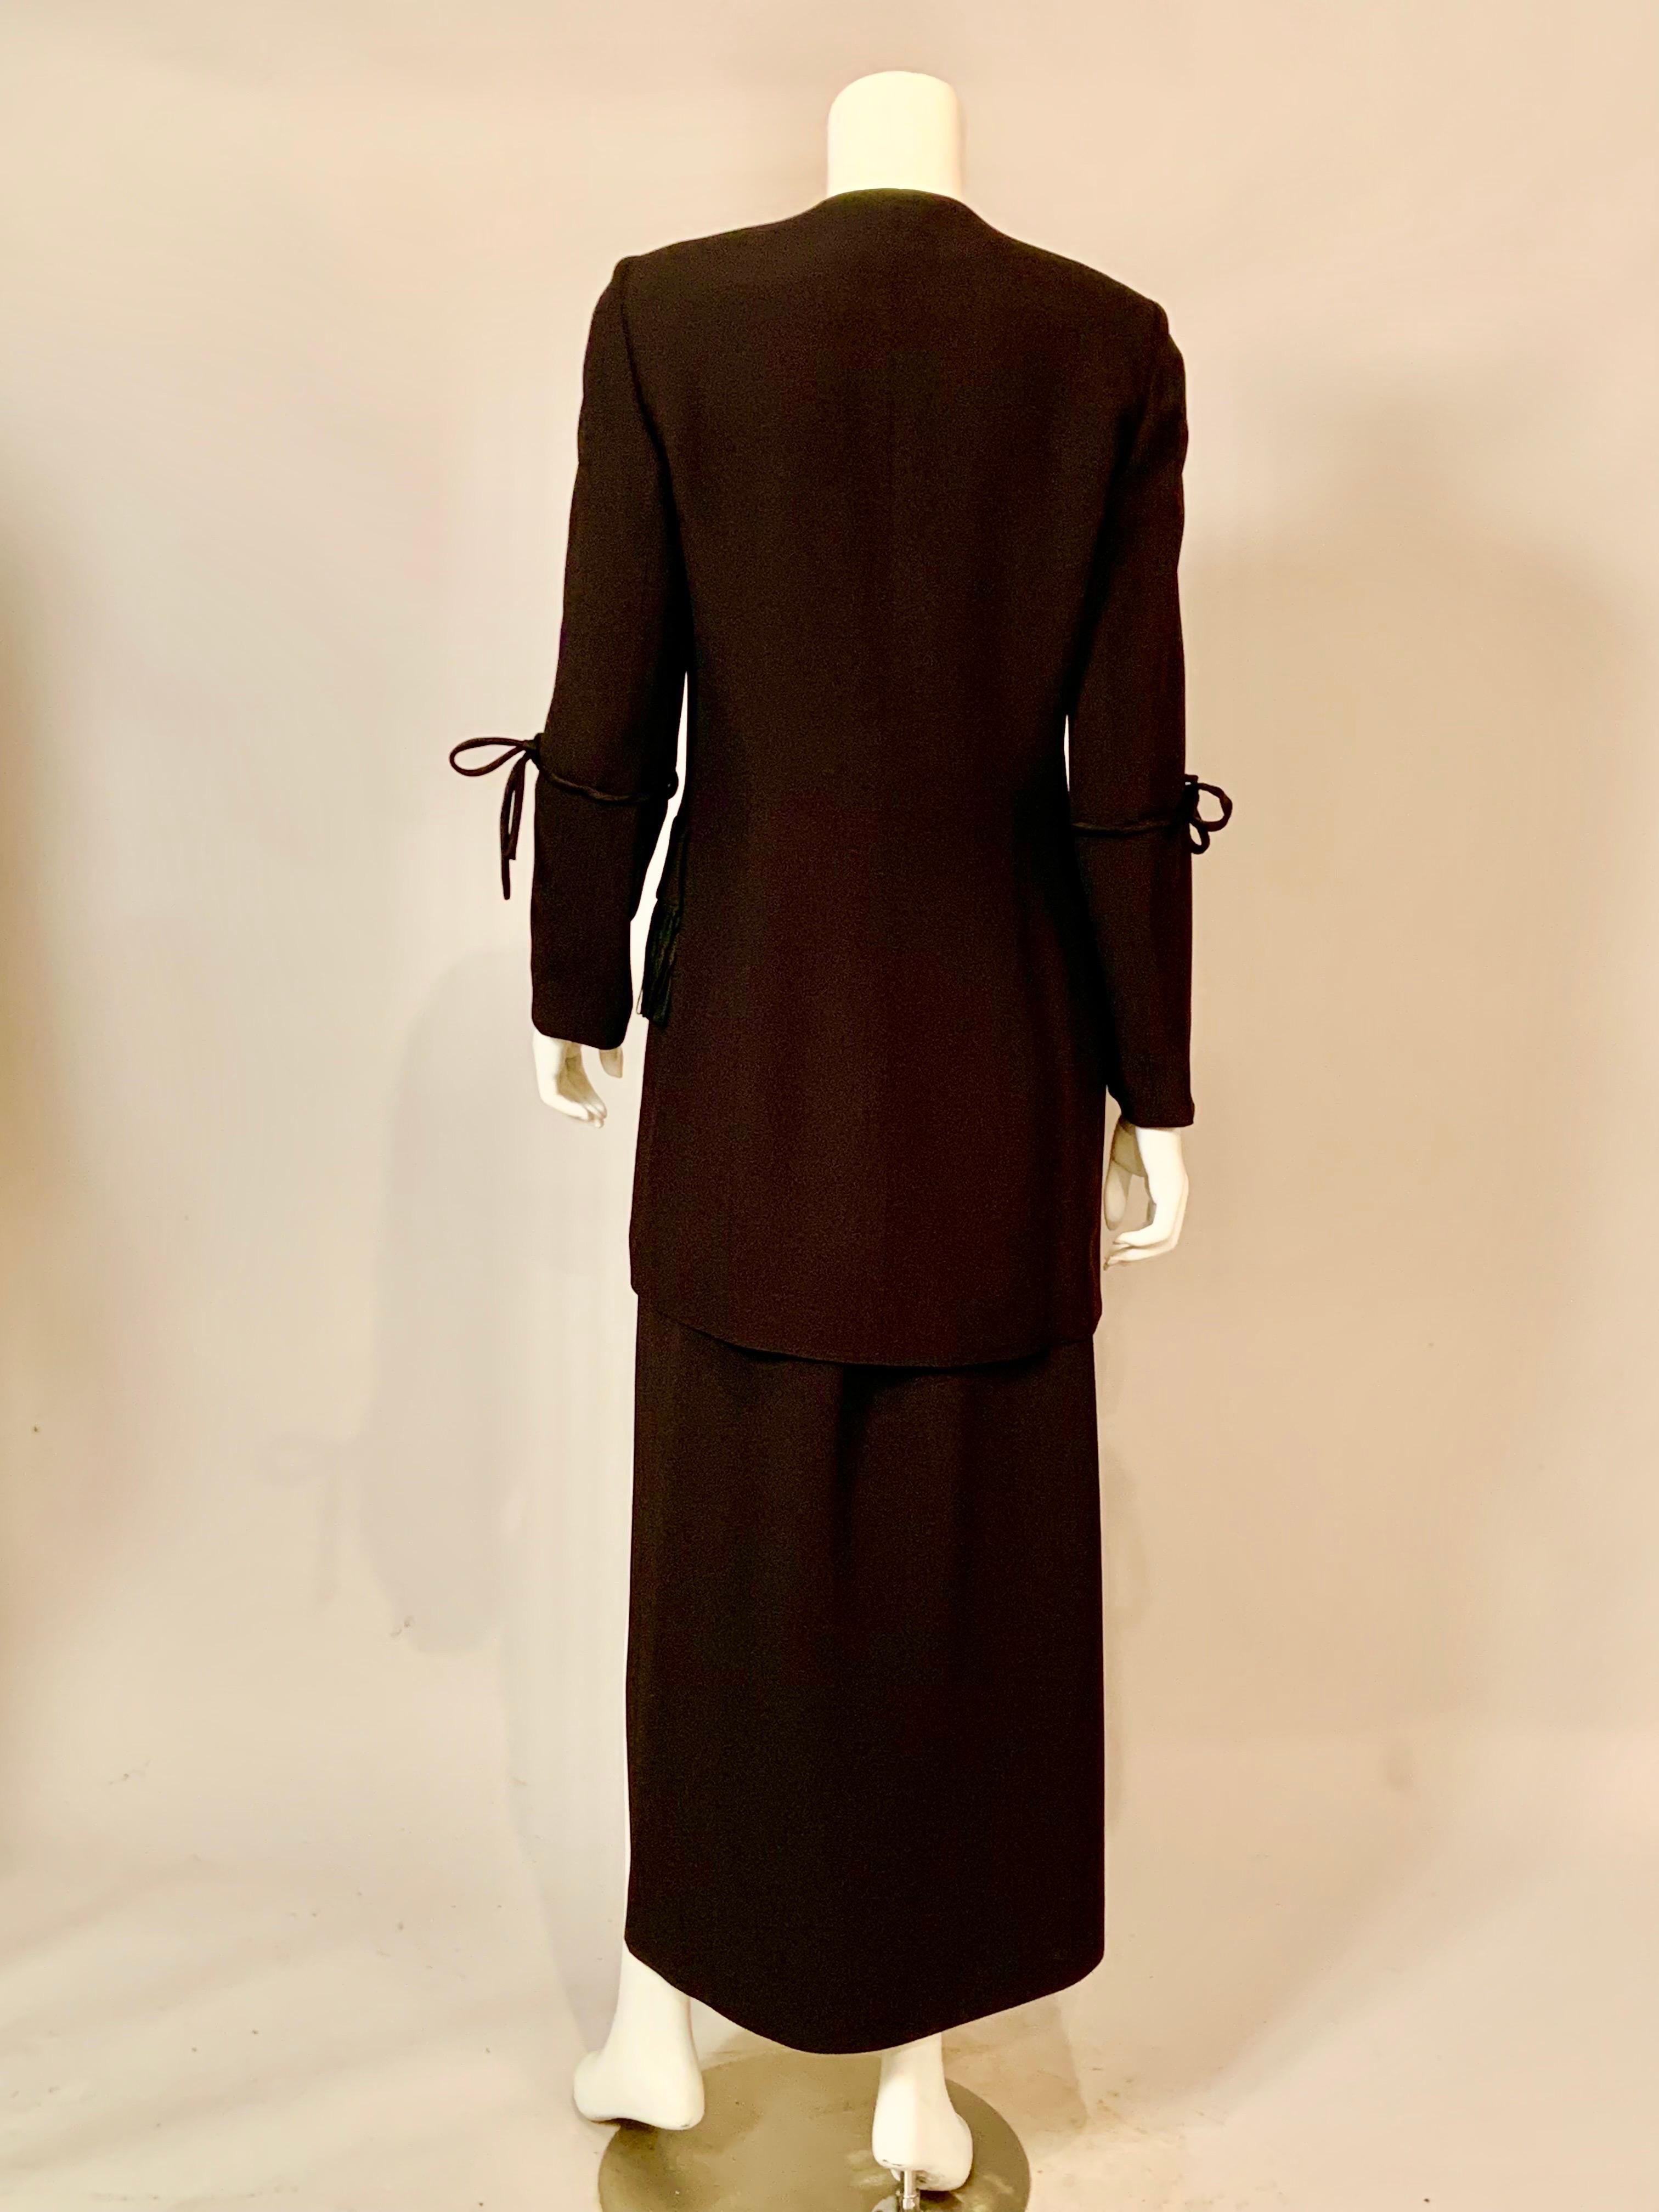 Chloe Black Silk Evening Suit with Satin Trim Skirt with Very High Side Opening 3